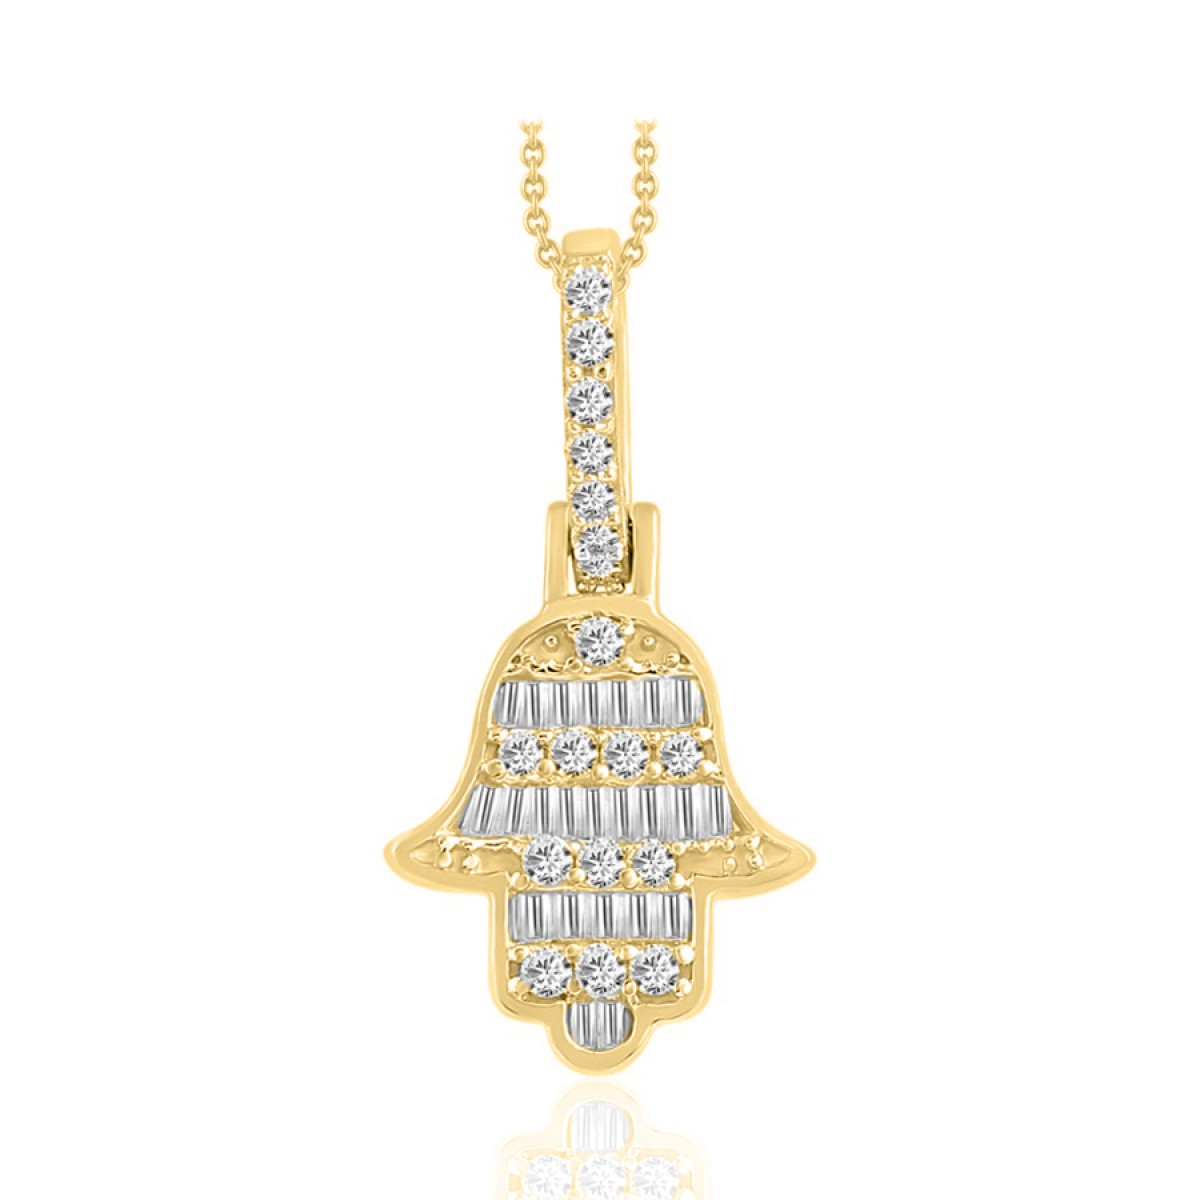 14K YELLOW GOLD 1/5CT ROUND/BAGUETTE DIAMOND LADIES PENDANT WITH CHAIN 